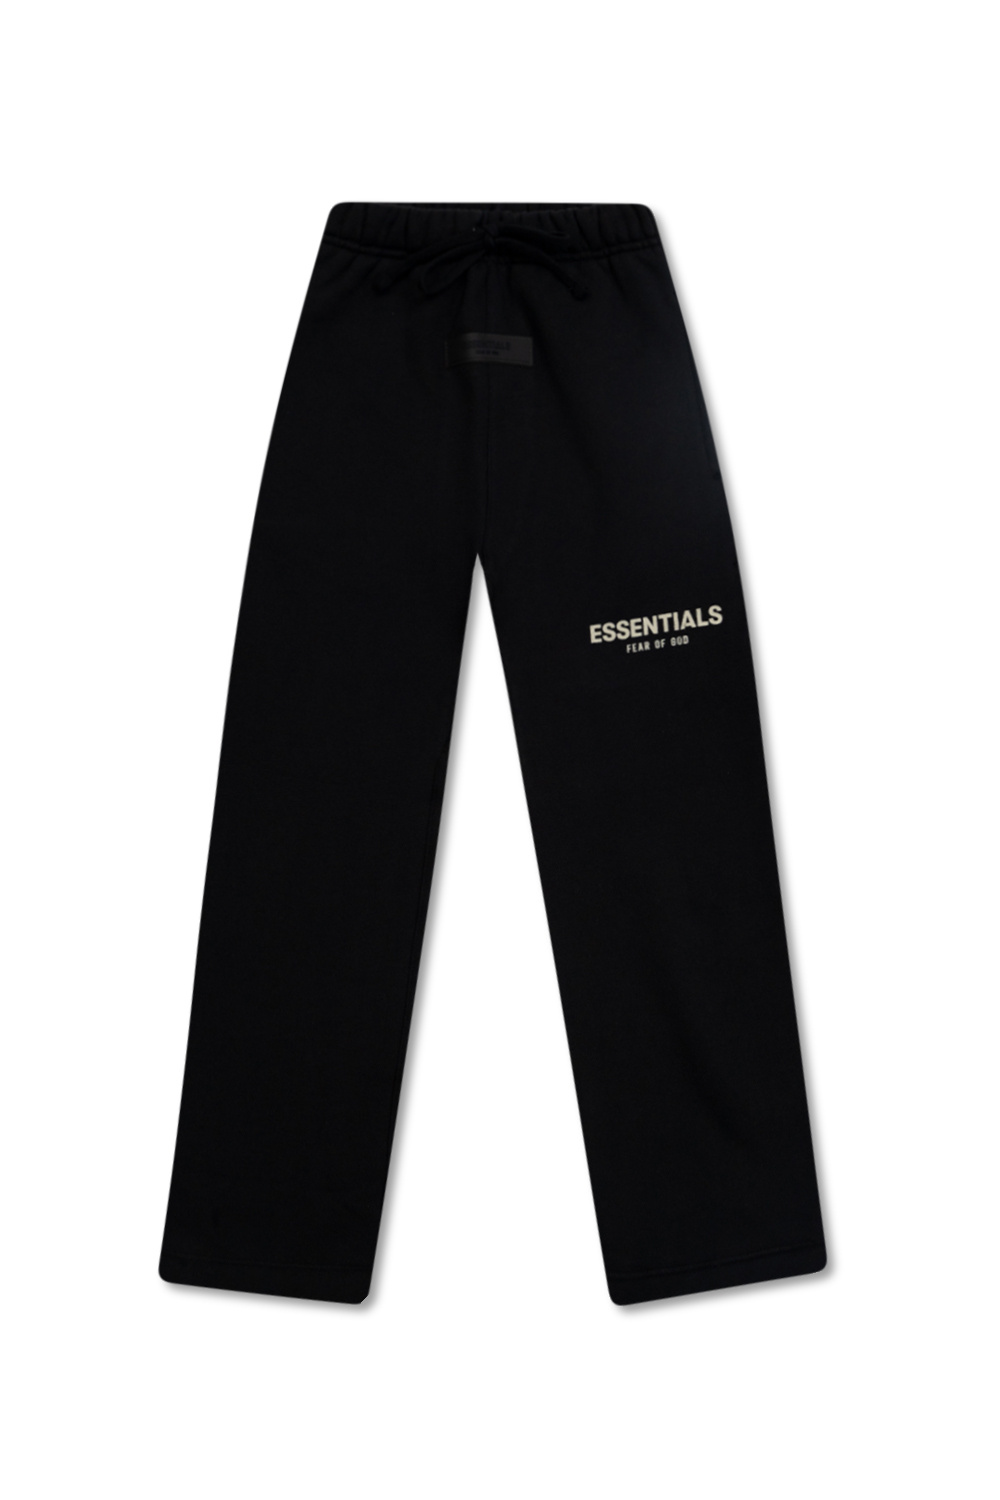 Black Sweatpants with logo Fear Of God Essentials Kids - IetpShops Canada -  versace jeans couture black embossed slide